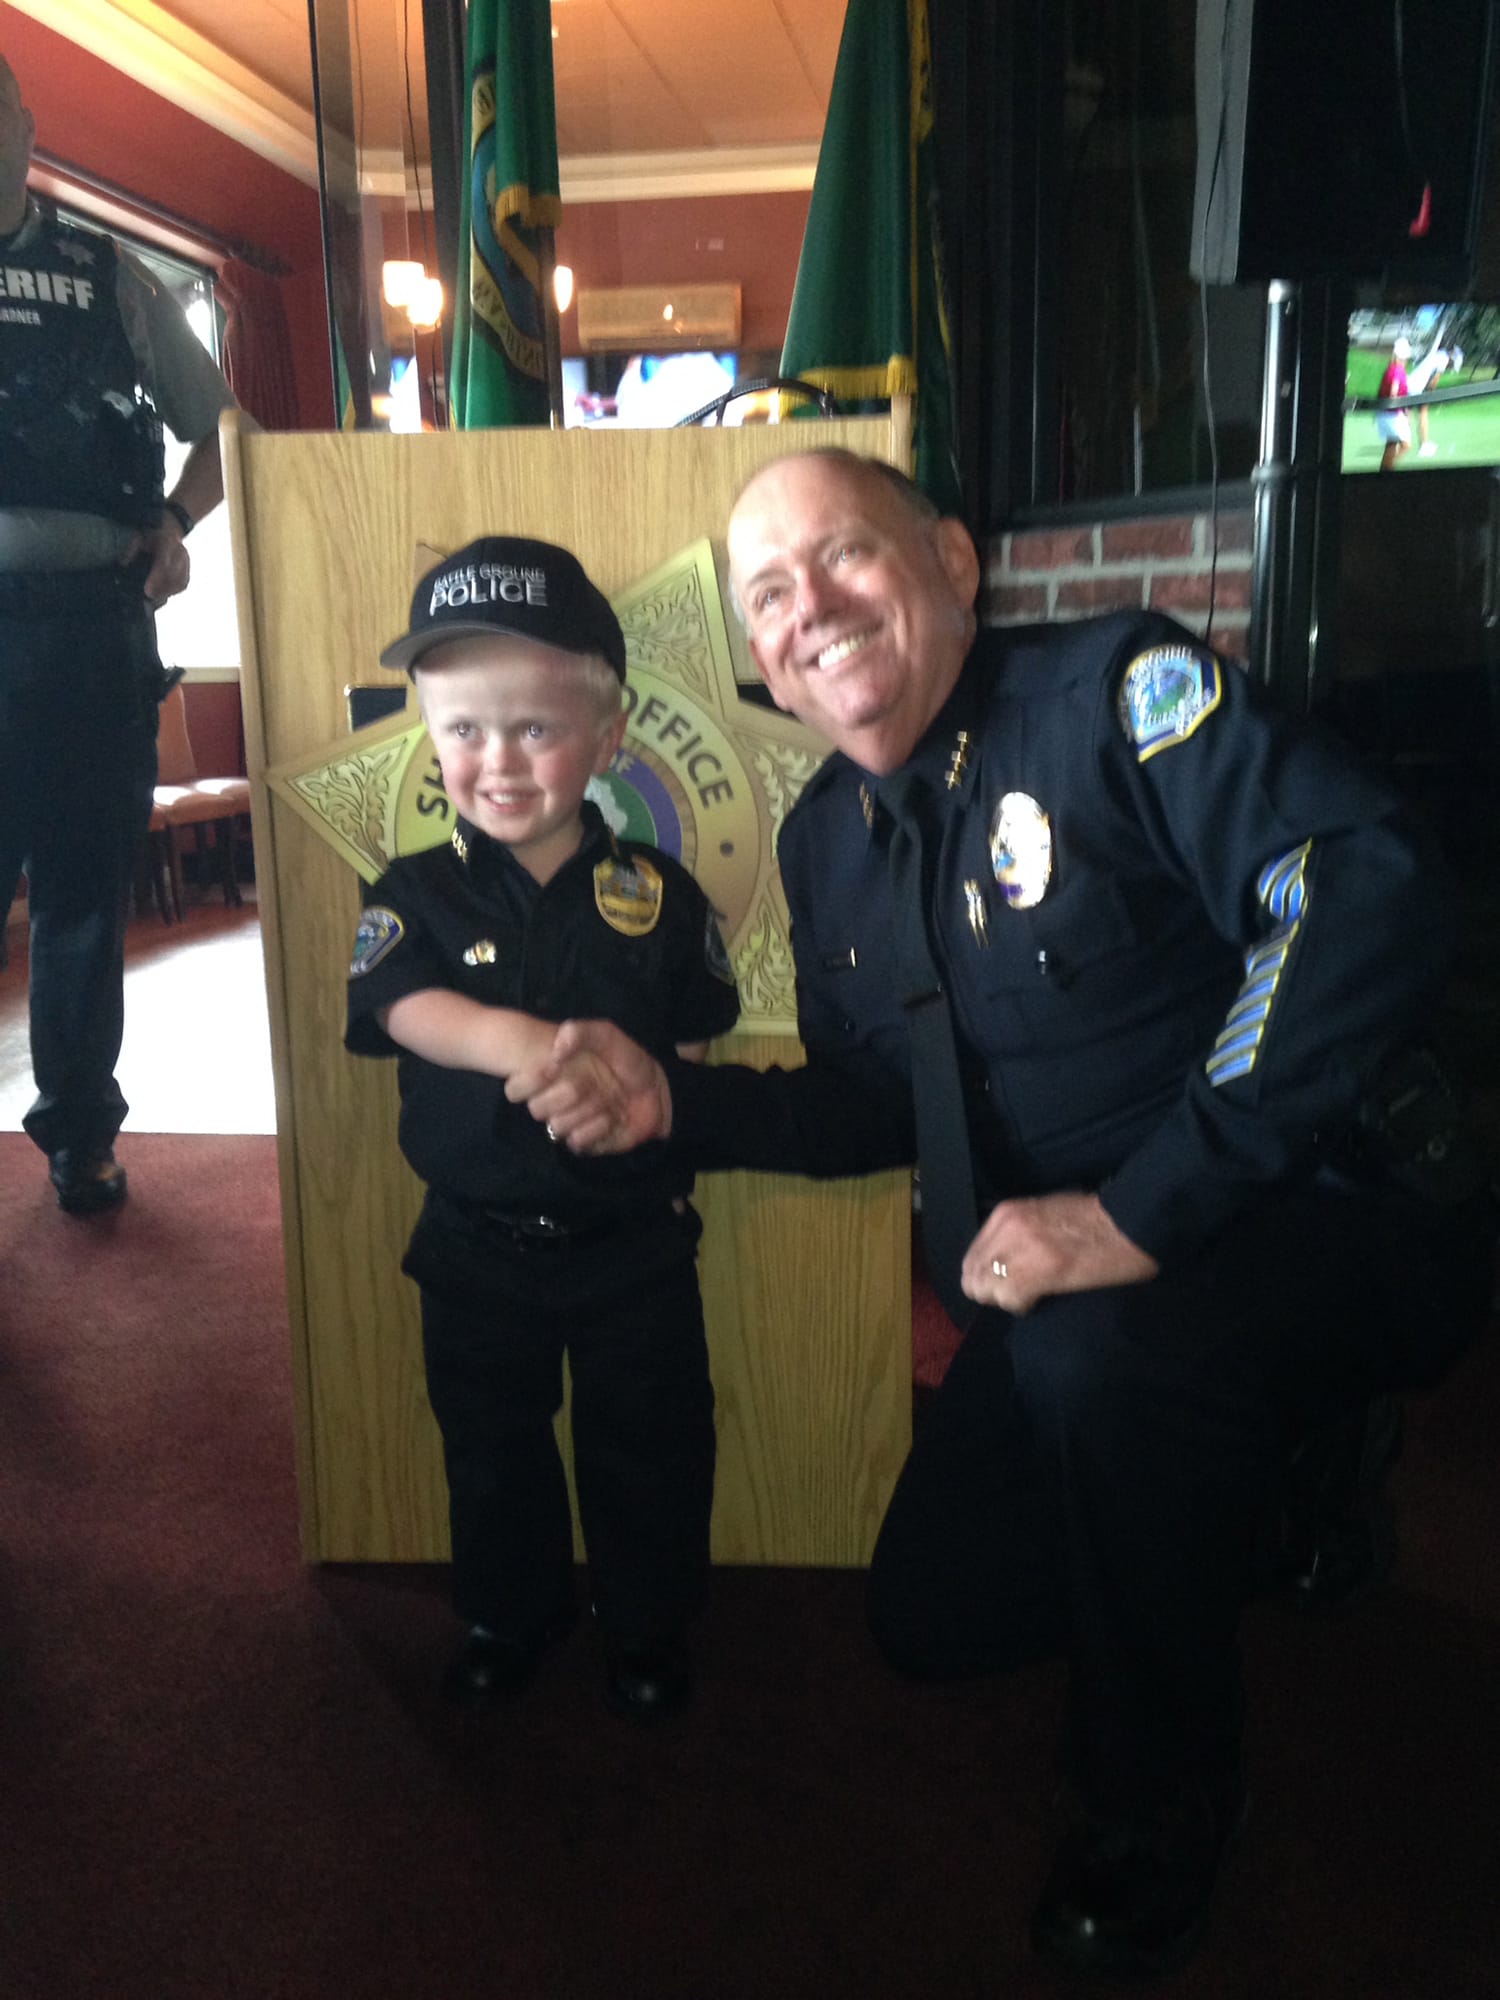 Battle Ground: Battle Ground Police Chief Bob Richardson shakes hands with honorary Police Chief Chase Getch, an 8-year-old boy with achondroplasia, a form of dwarfism.